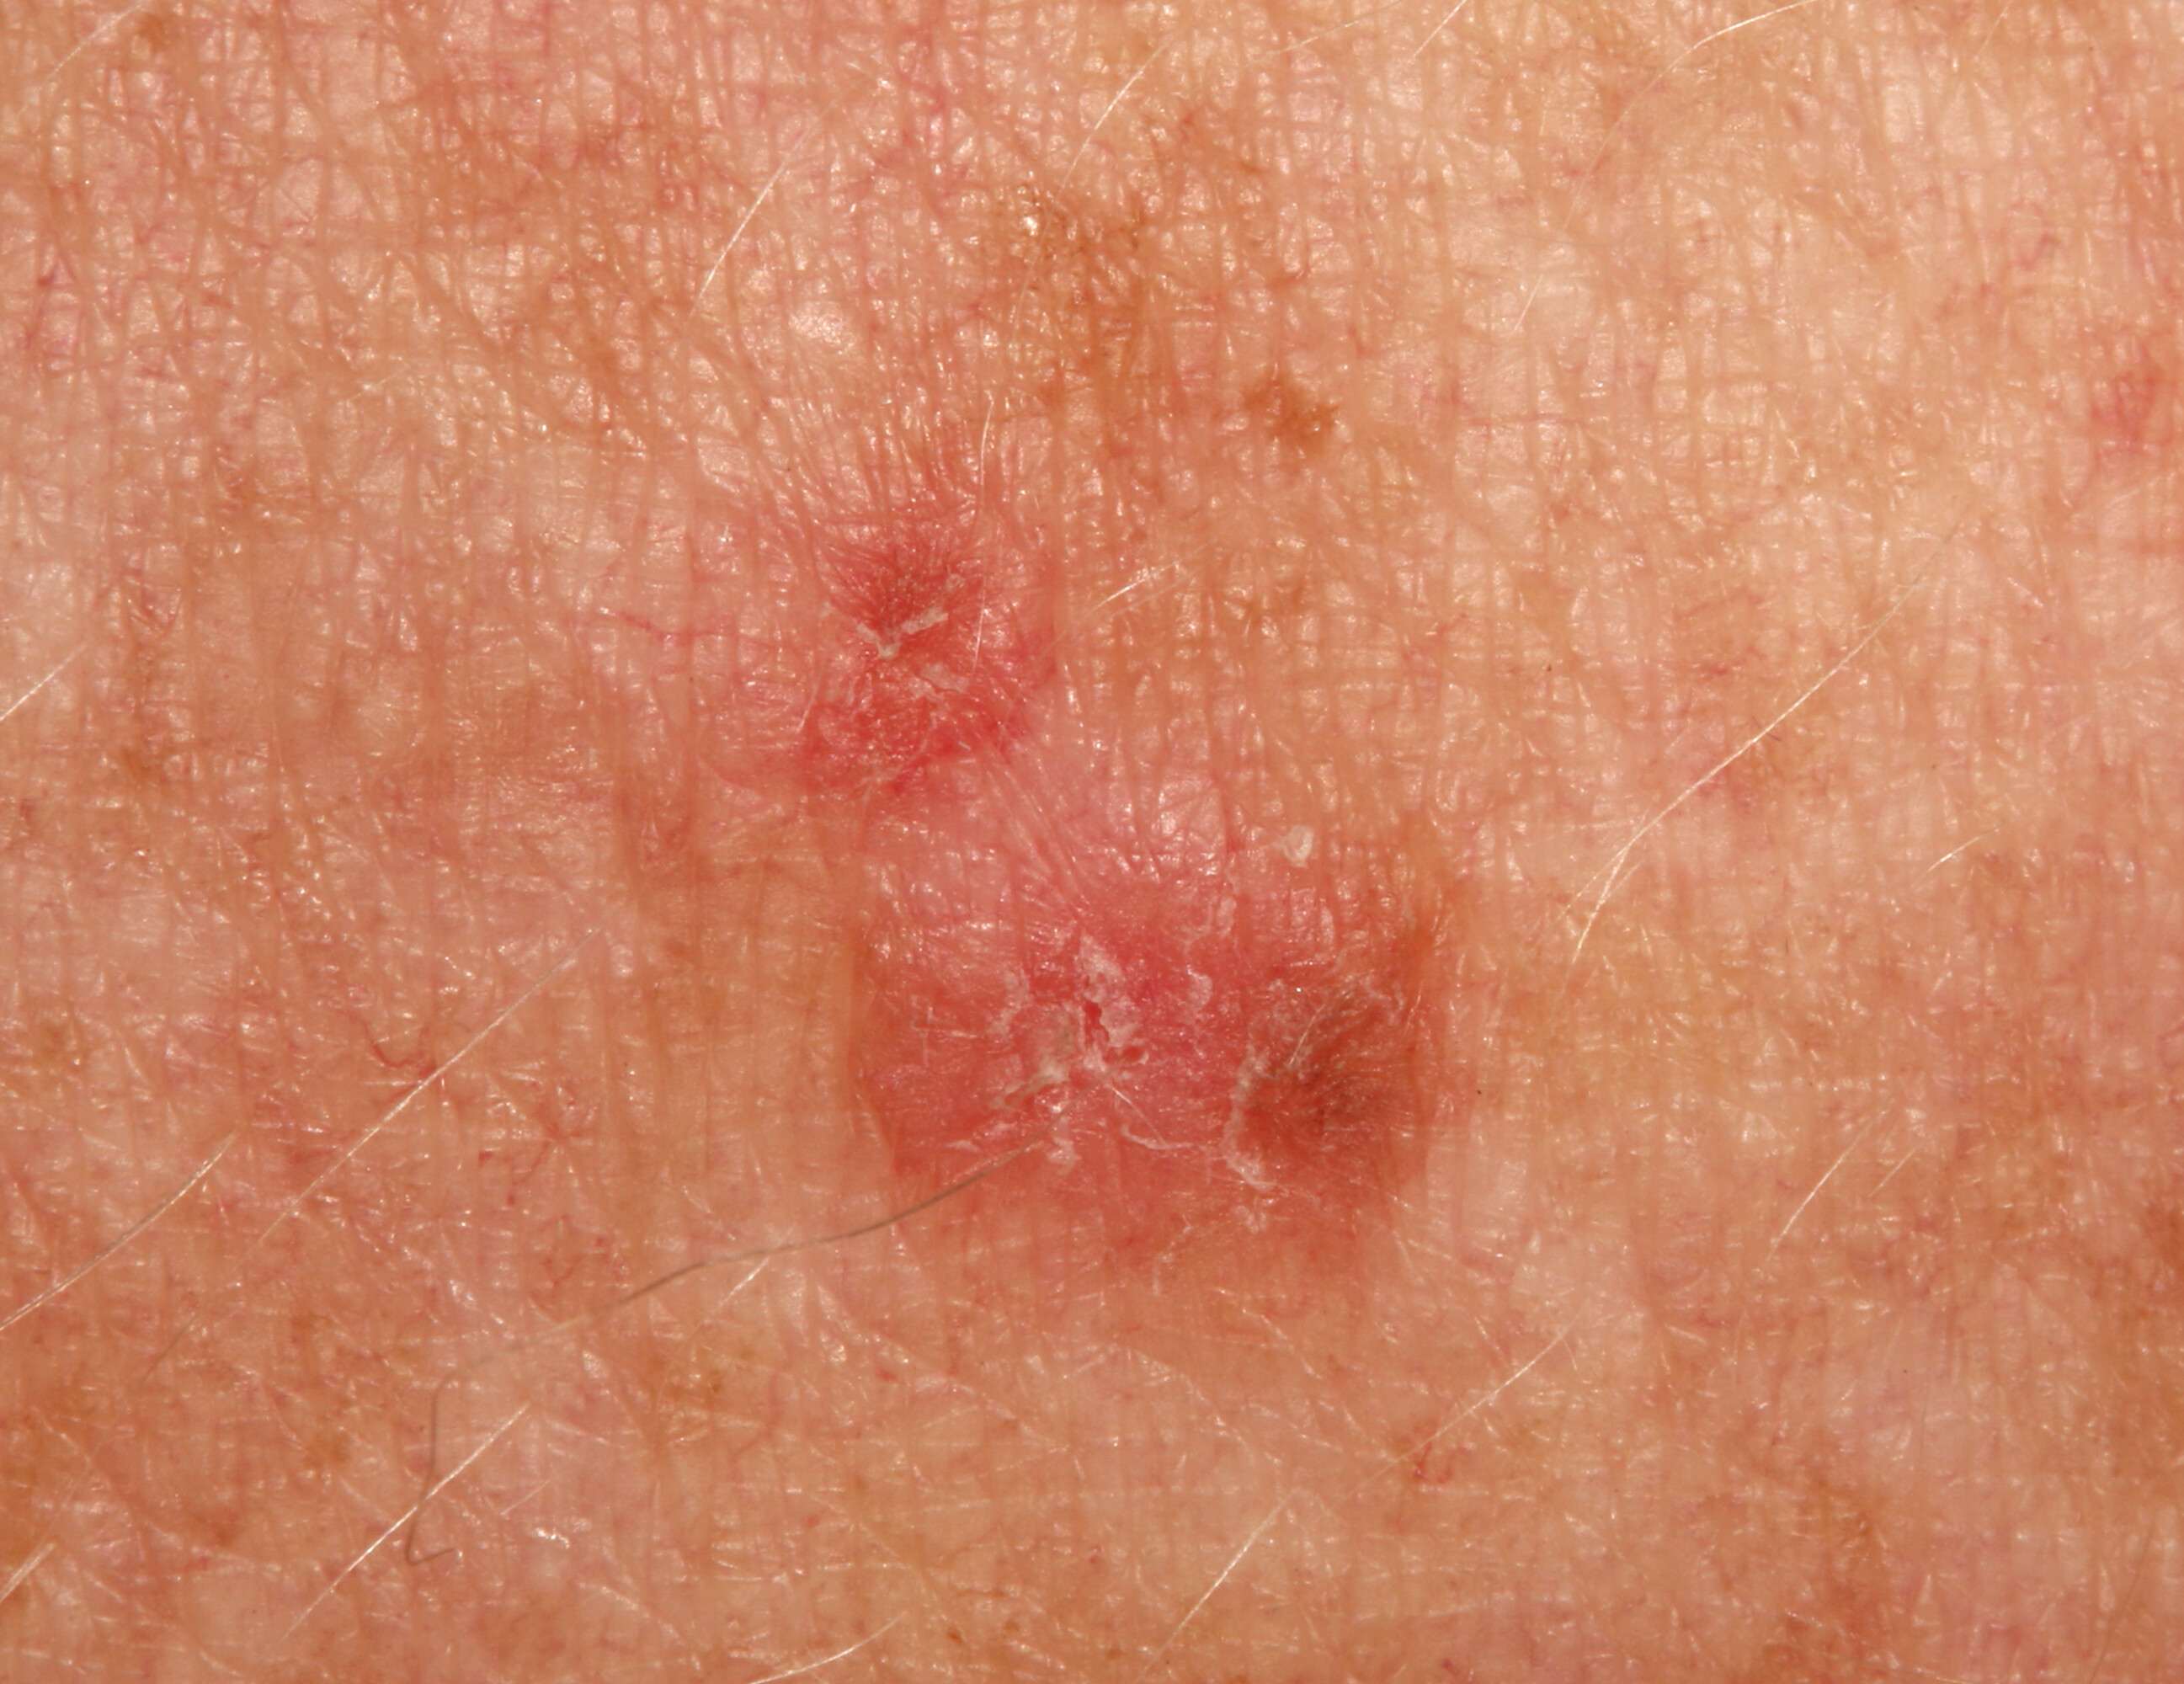 Actinic Keratosis Prevention with Retin A ? » Scary Symptoms